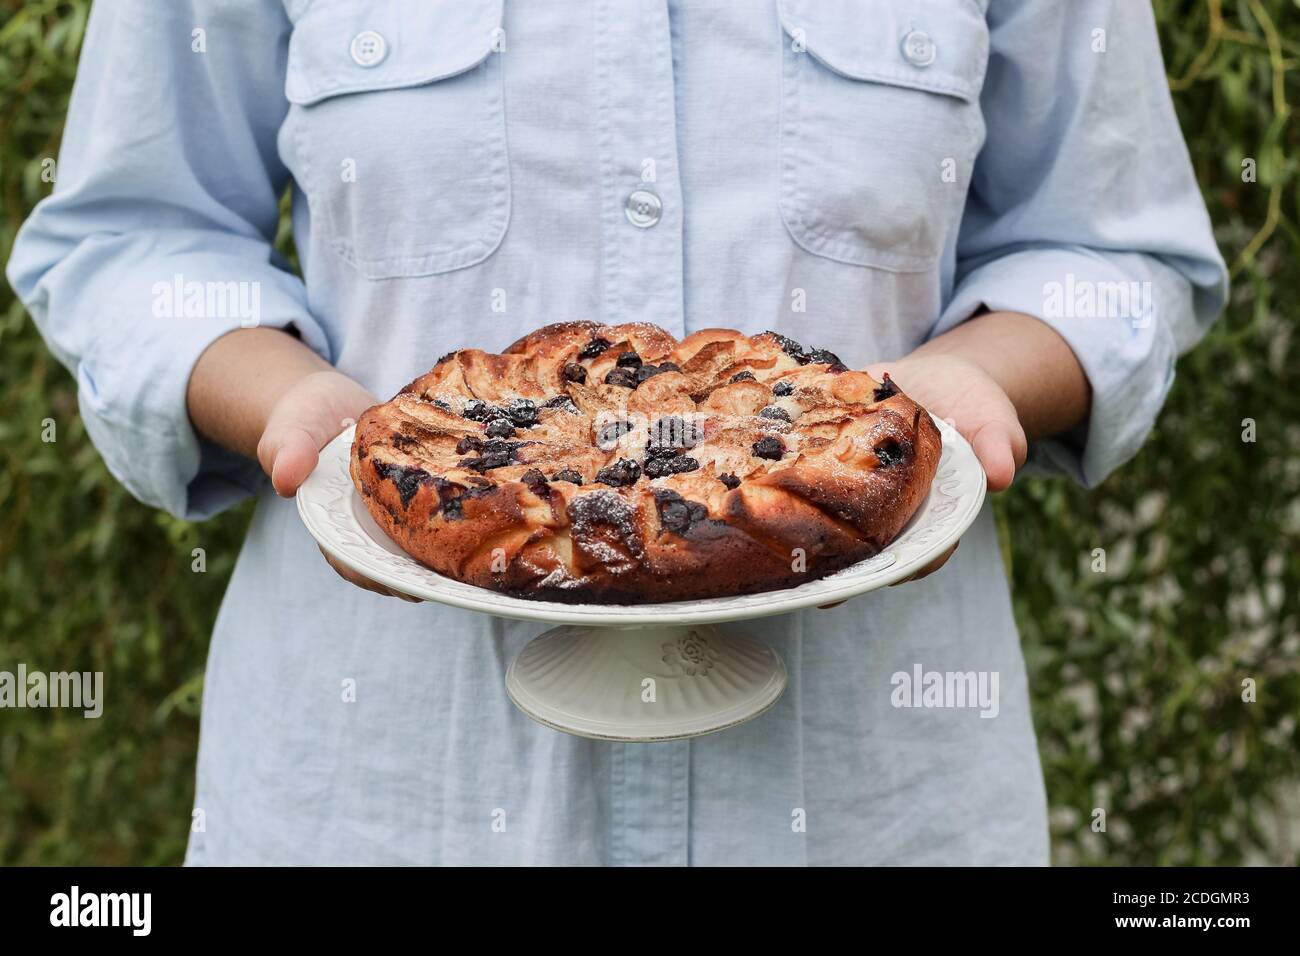 A woman hands holding home baked apple pie with blueberries Stock Photo